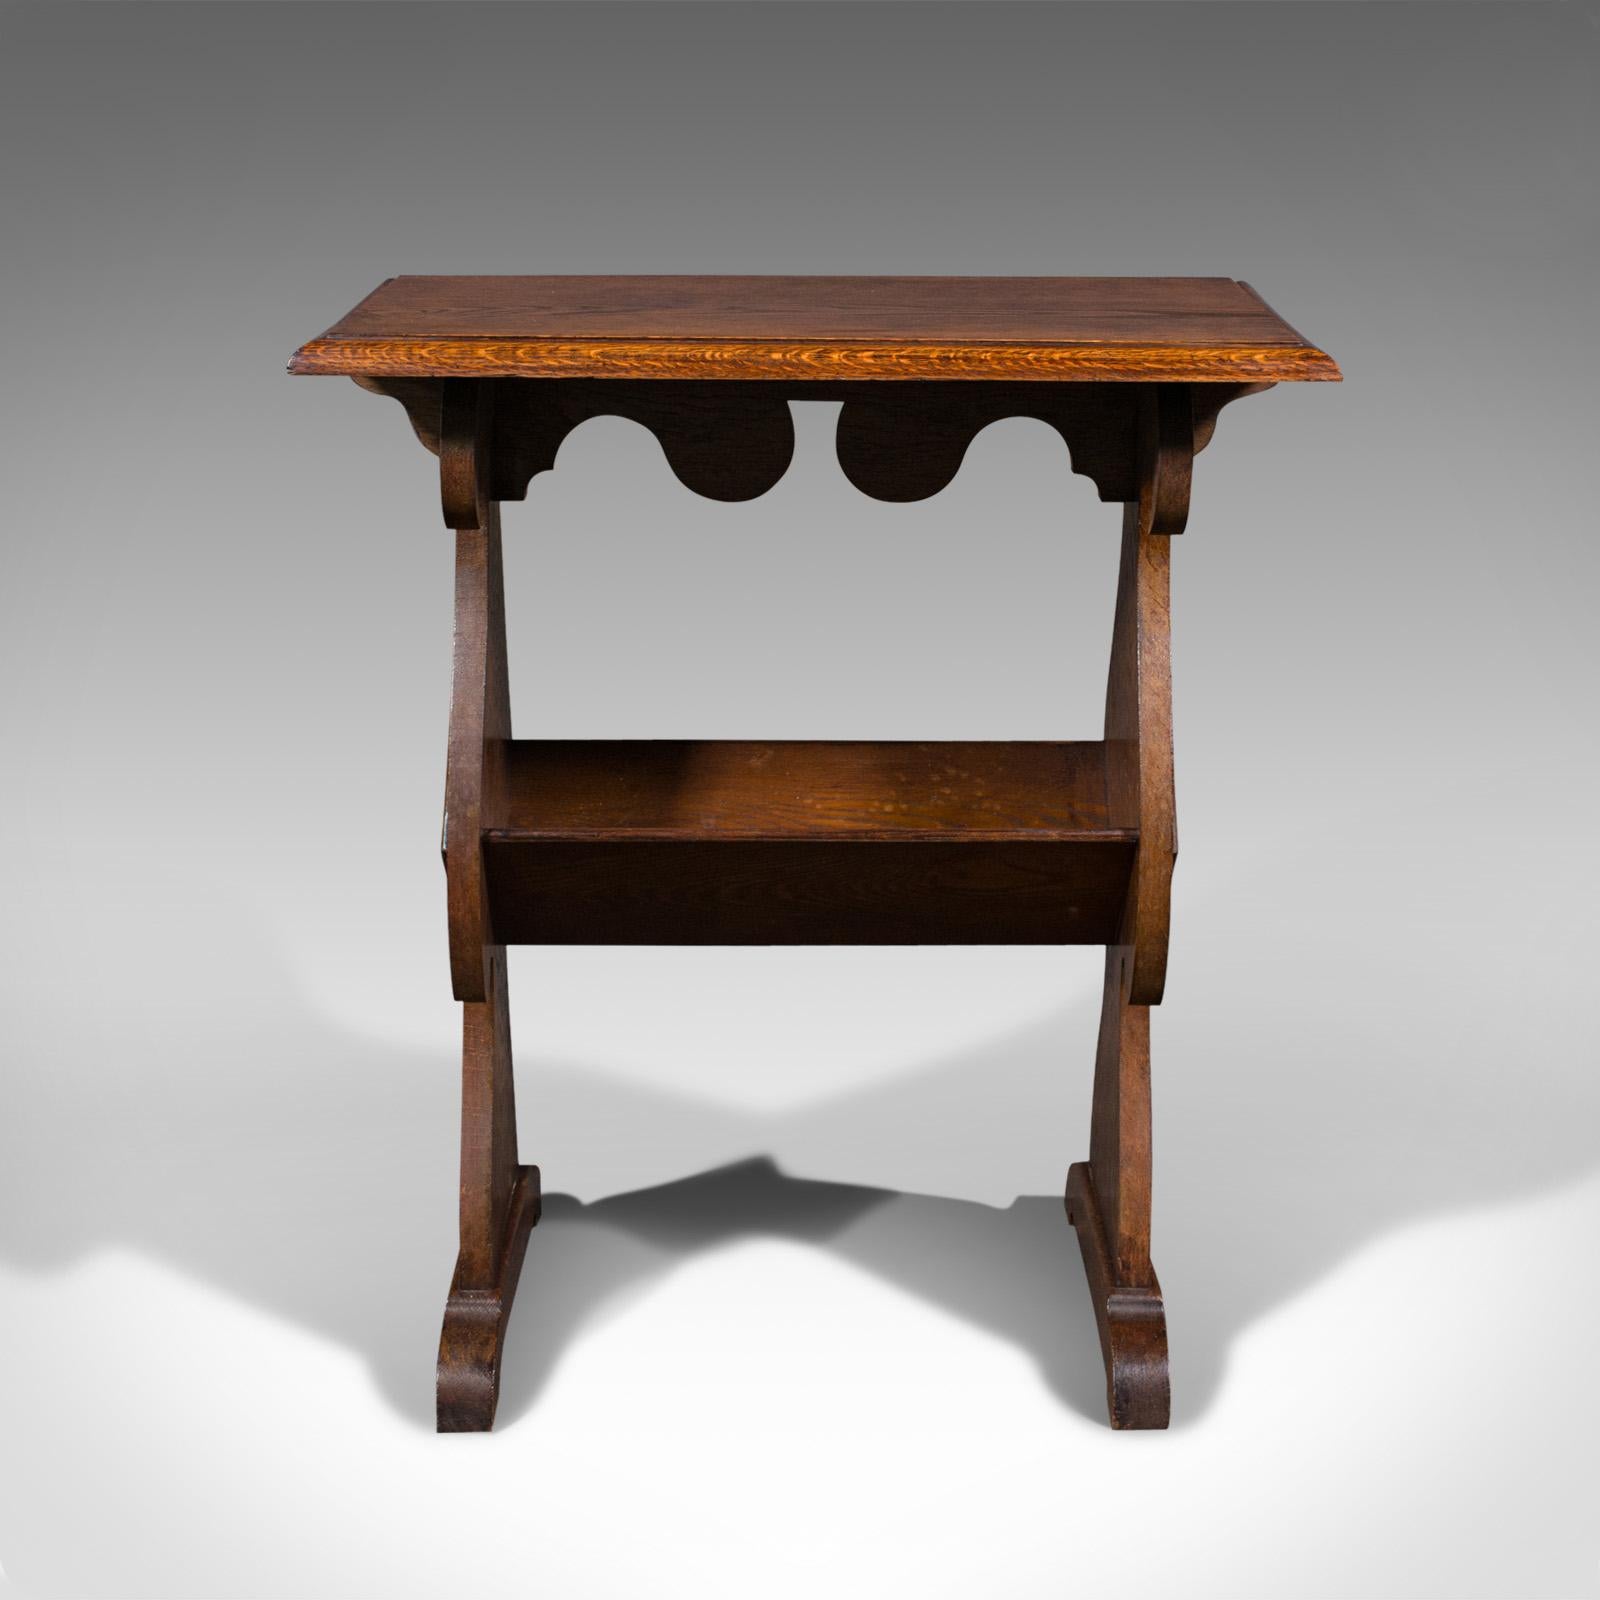 This is an antique reader's stand. An English, oak side table with book trough, dating to the Edwardian period, circa 1910.

Wonderfully sized for an intimate reading nook
Displays a desirable aged patina and in good order
Select oak shows